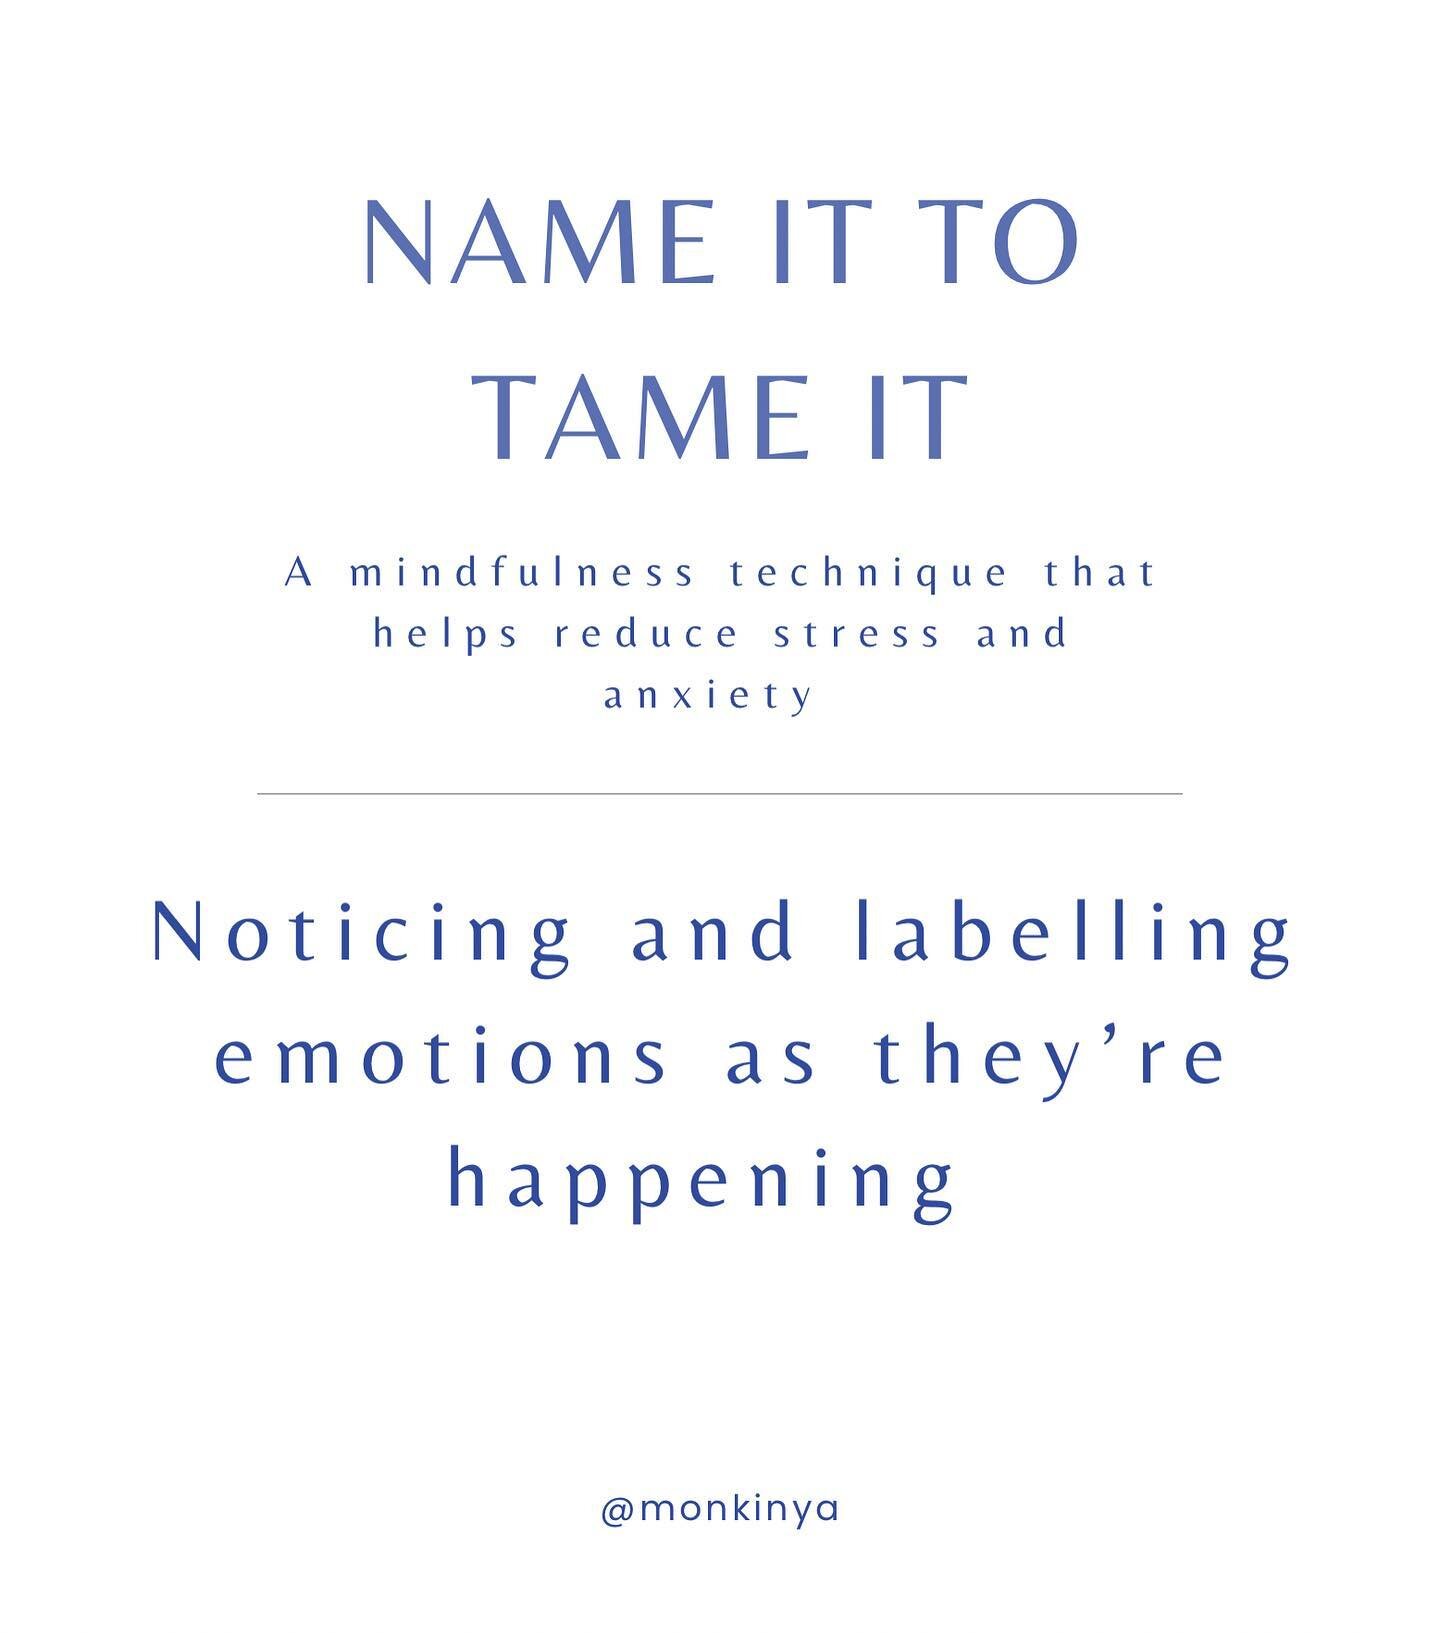 Name it to tame it: A simple mindfulness technique that helps cope with difficult emotions without getting overwhelmed. 
This technique was first identified by Dr. Daniel Siegel, clinical professor of psychiatry at the UCLA School of Medicine and the